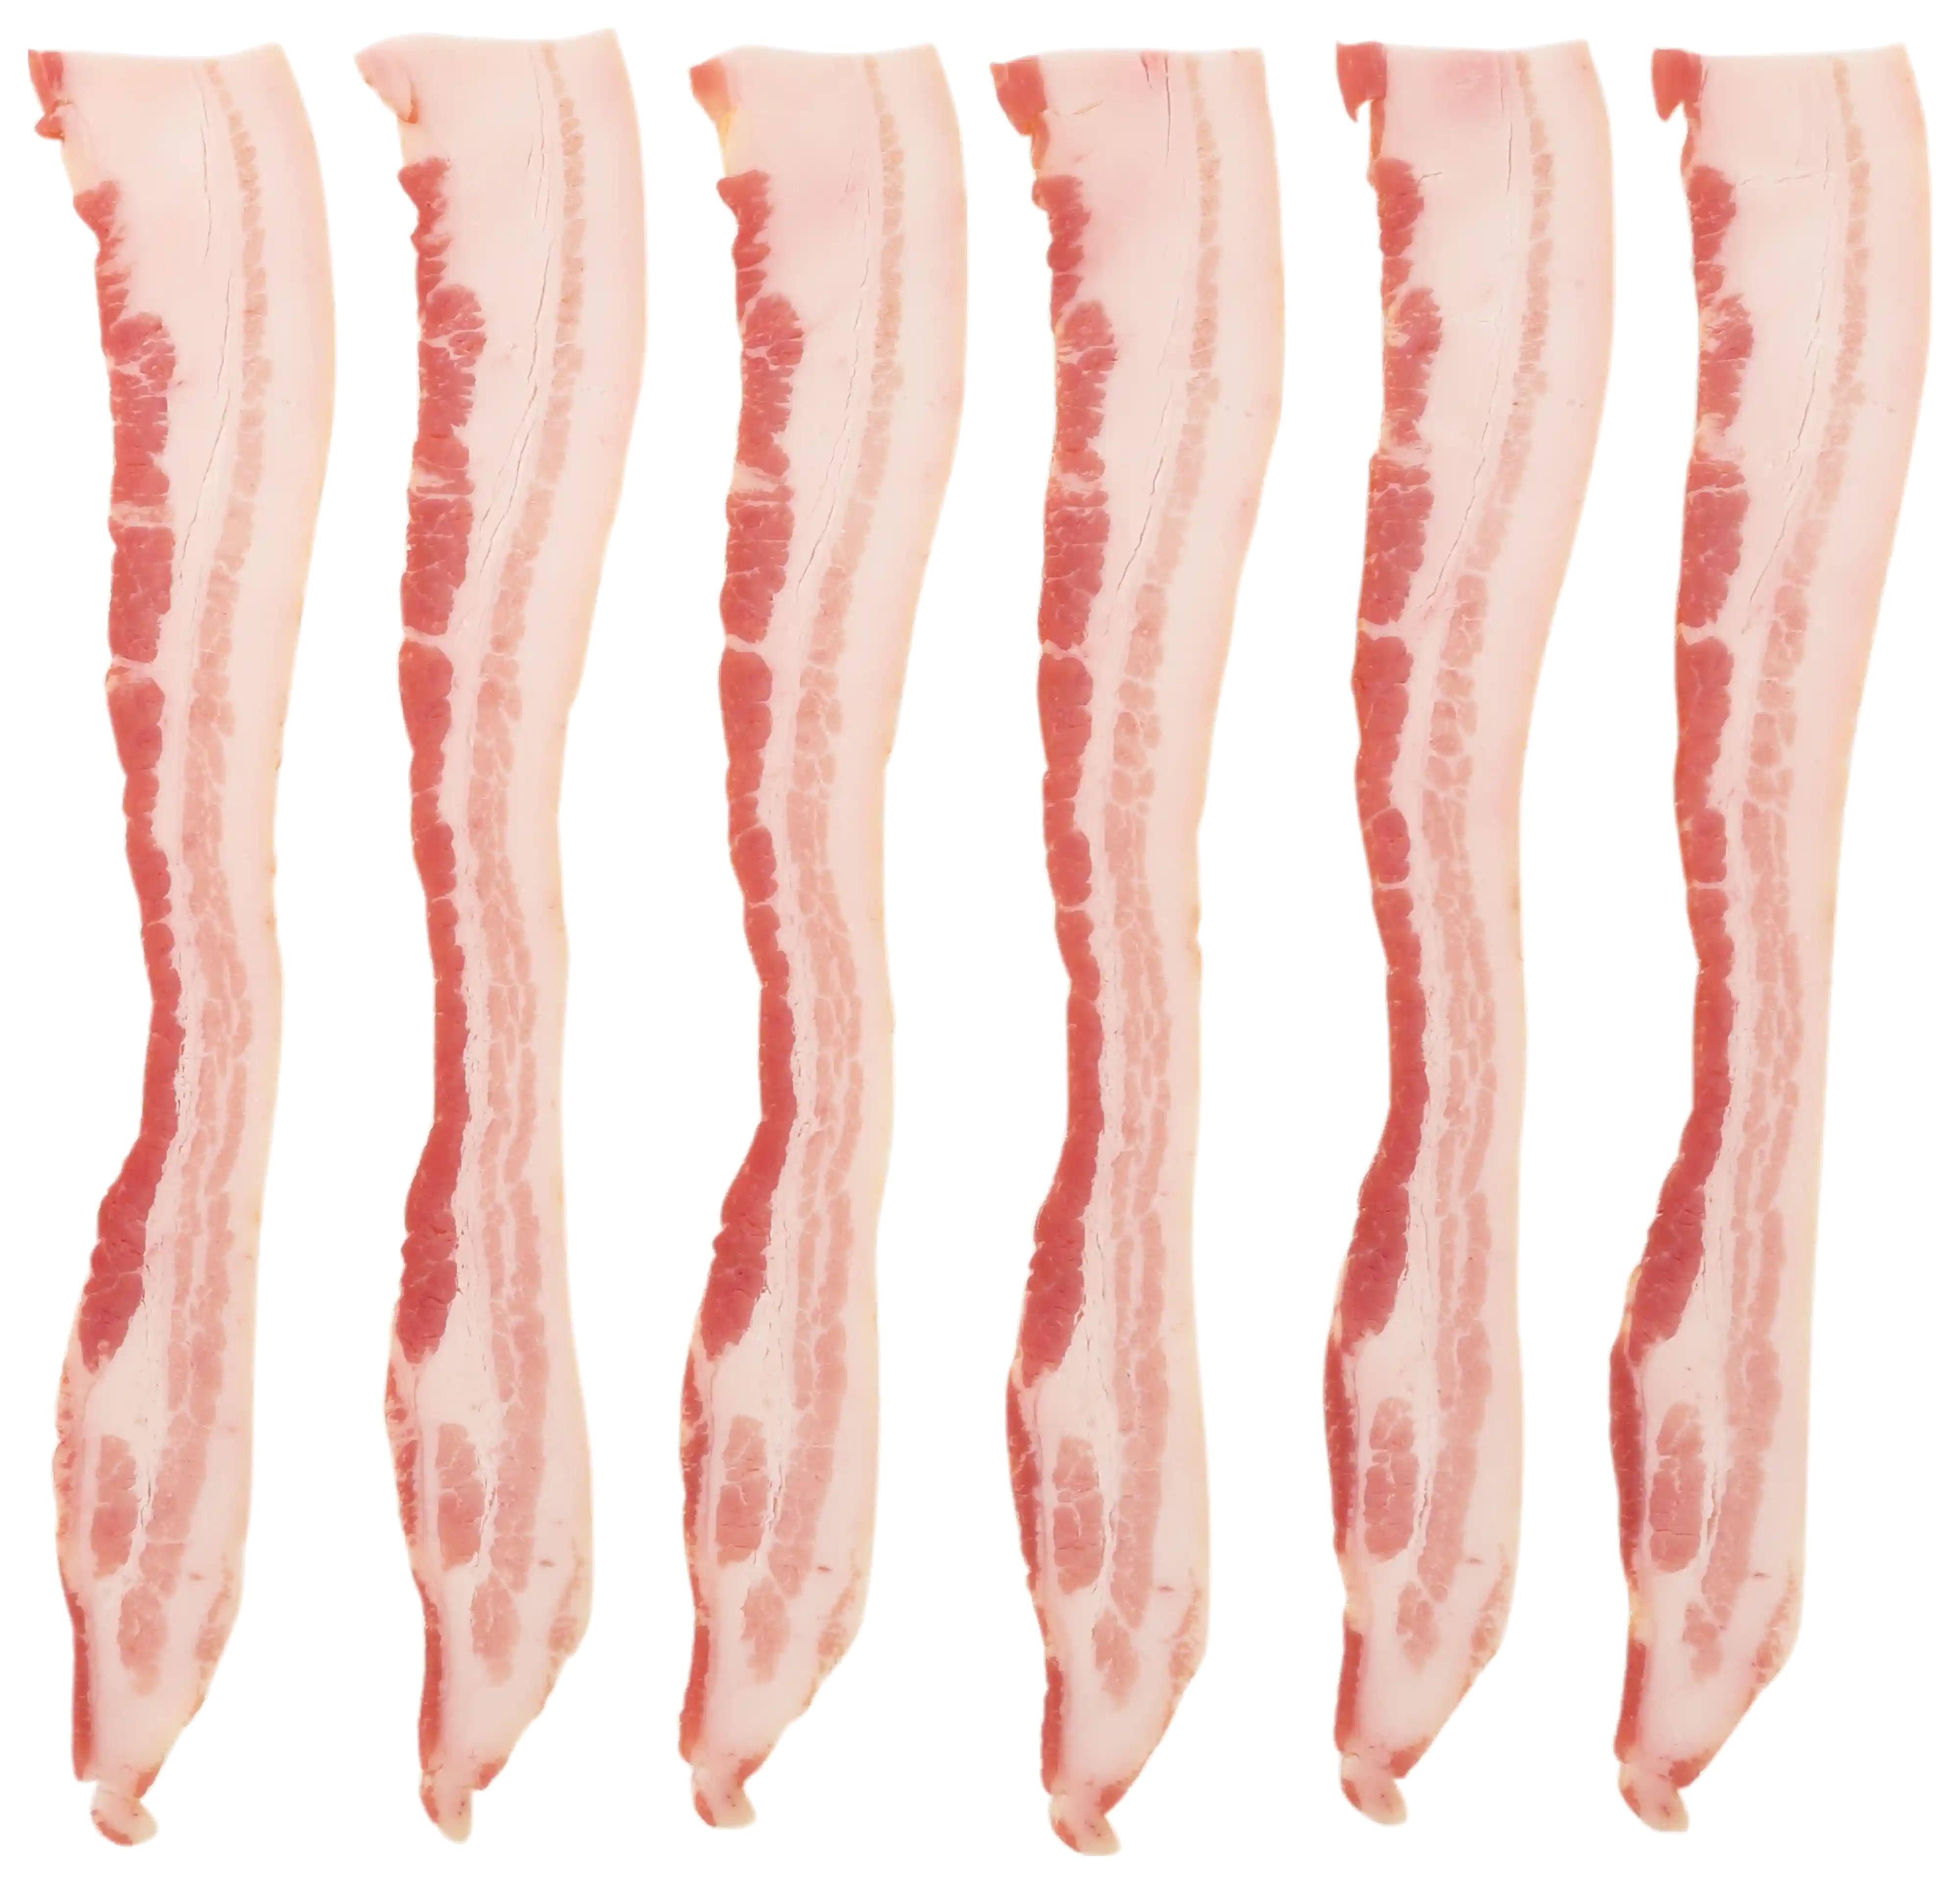 Wright® Brand Naturally Hickory Smoked Thin Sliced Bacon, Bulk, 30 Lbs, 18-22 Slices per Pound, Gas Flushed_image_11